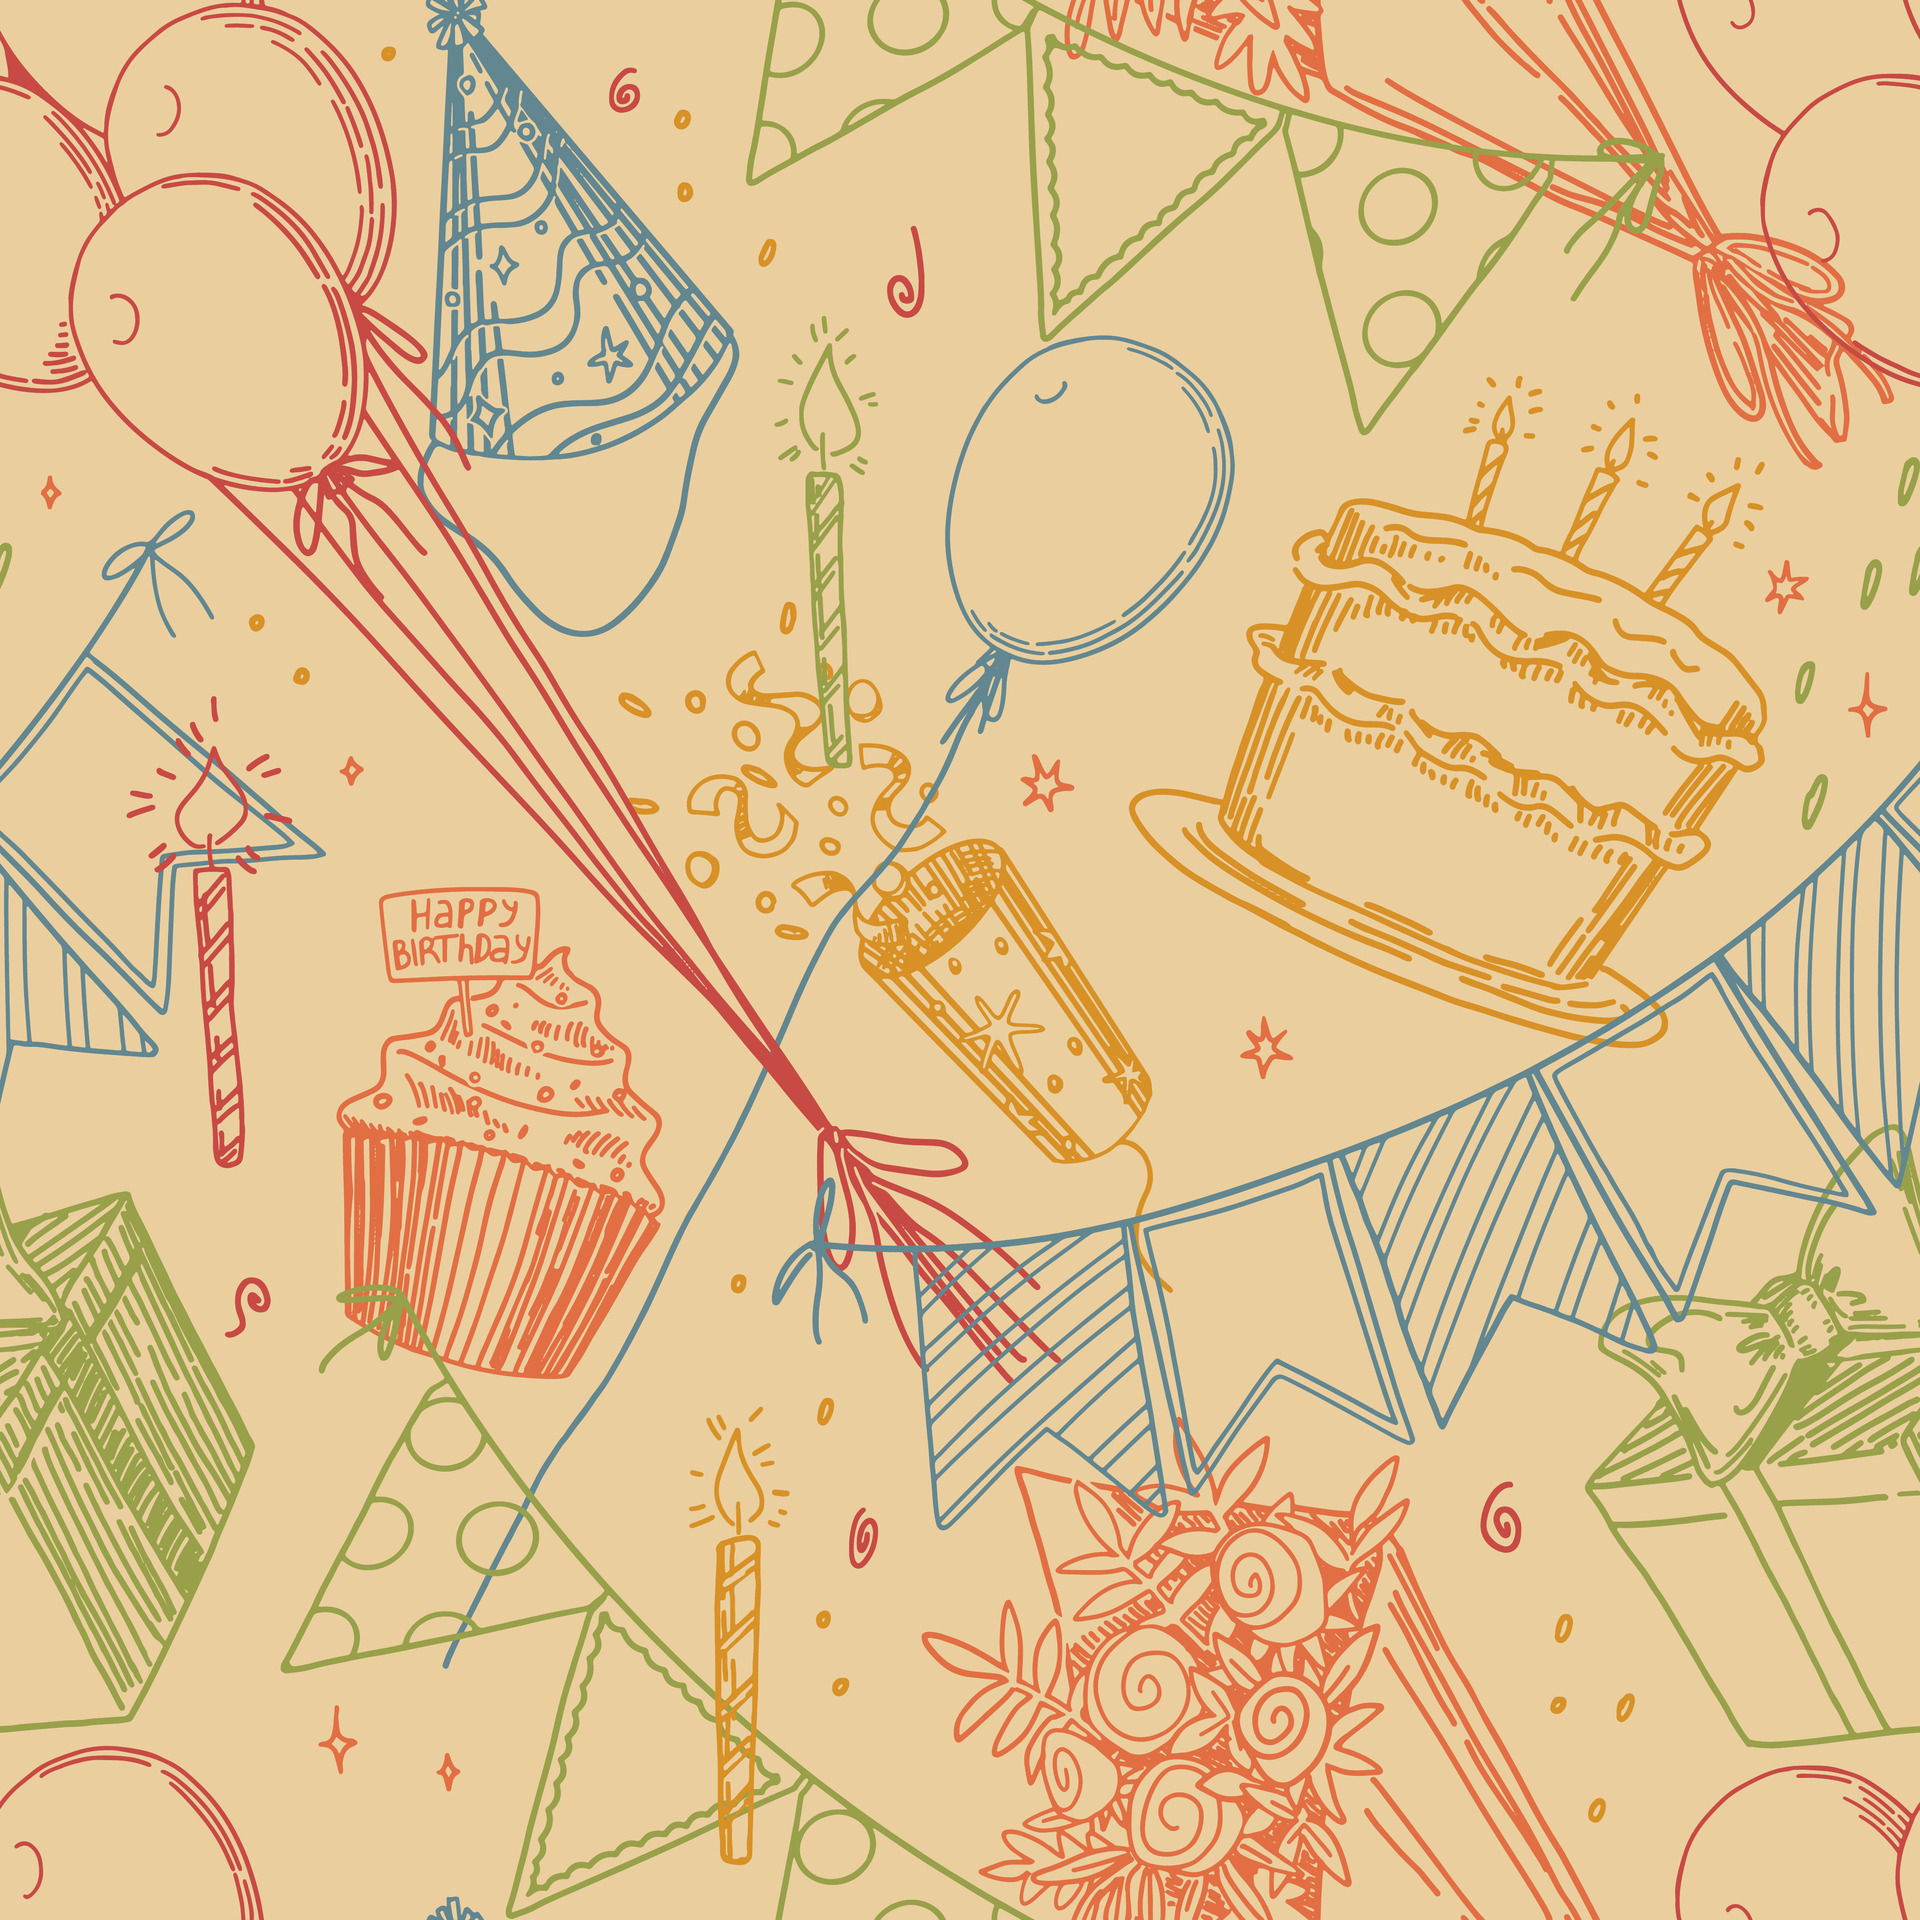 https://static.vecteezy.com/system/resources/previews/029/747/423/original/birthday-party-seamless-pattern-outline-illustrations-of-cake-candles-gift-card-festive-flags-bouquet-balloons-bright-retro-style-ornament-vector.jpg